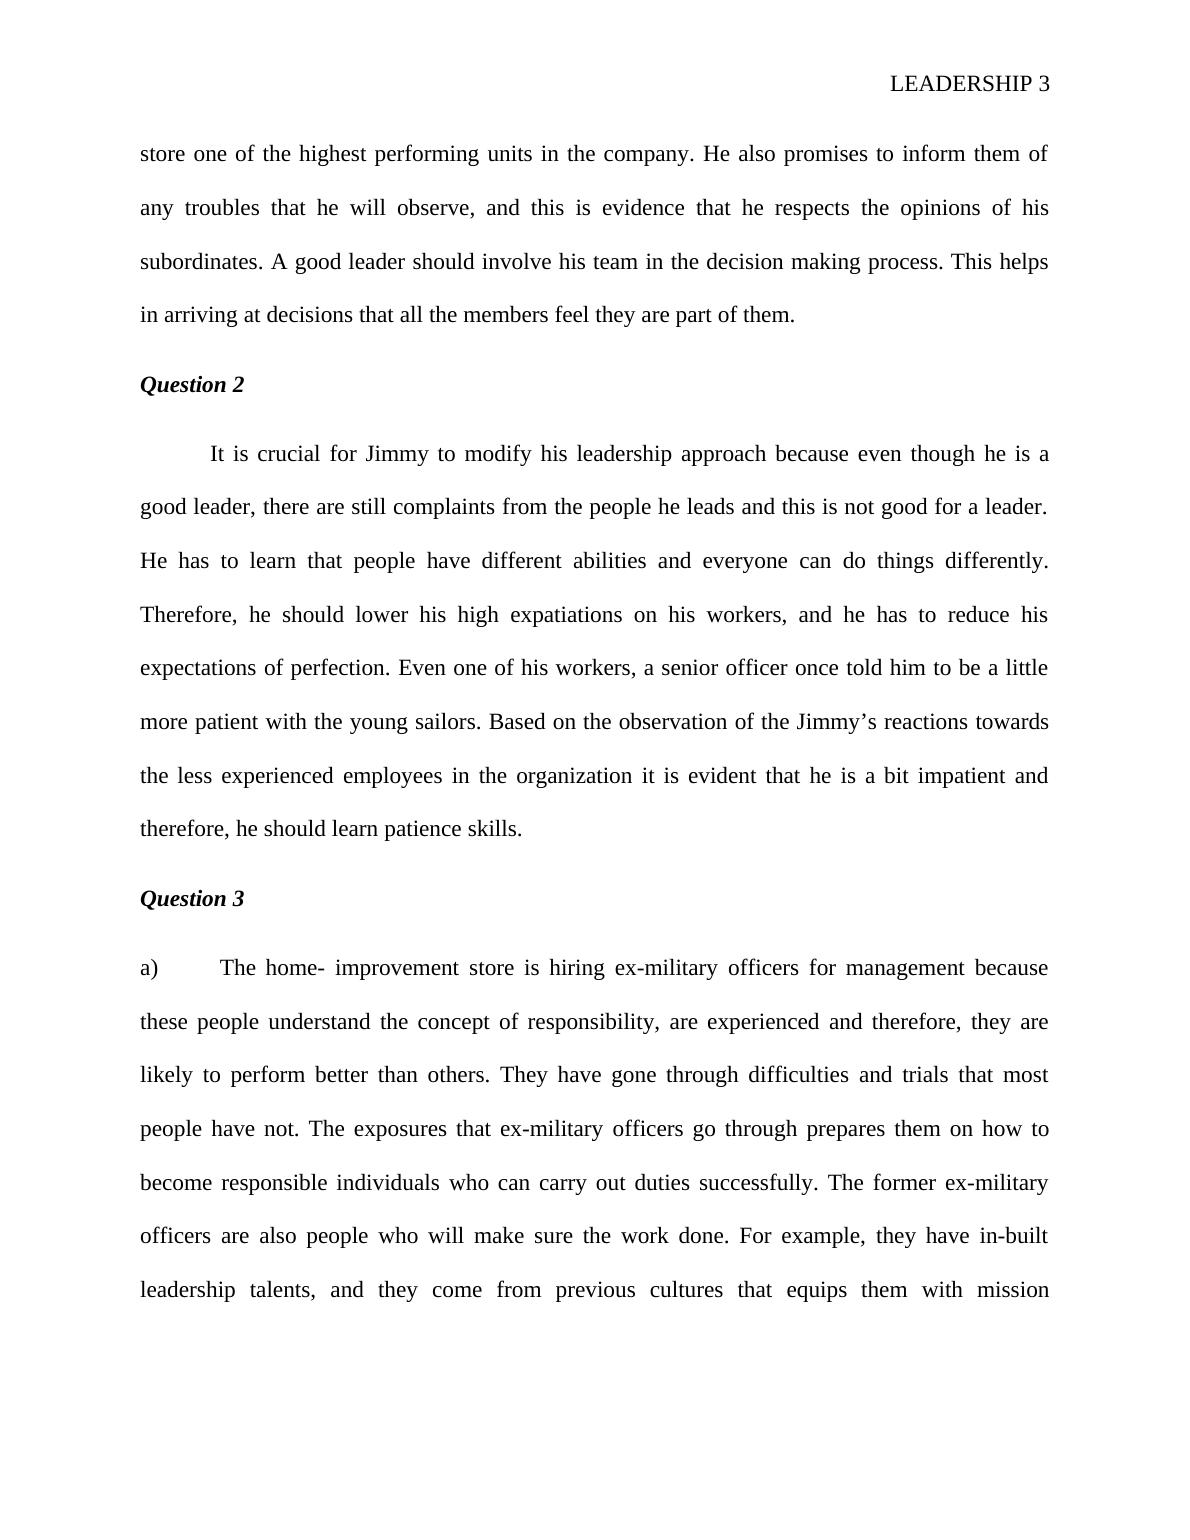 Paper On Study Of Effective Leadership_3